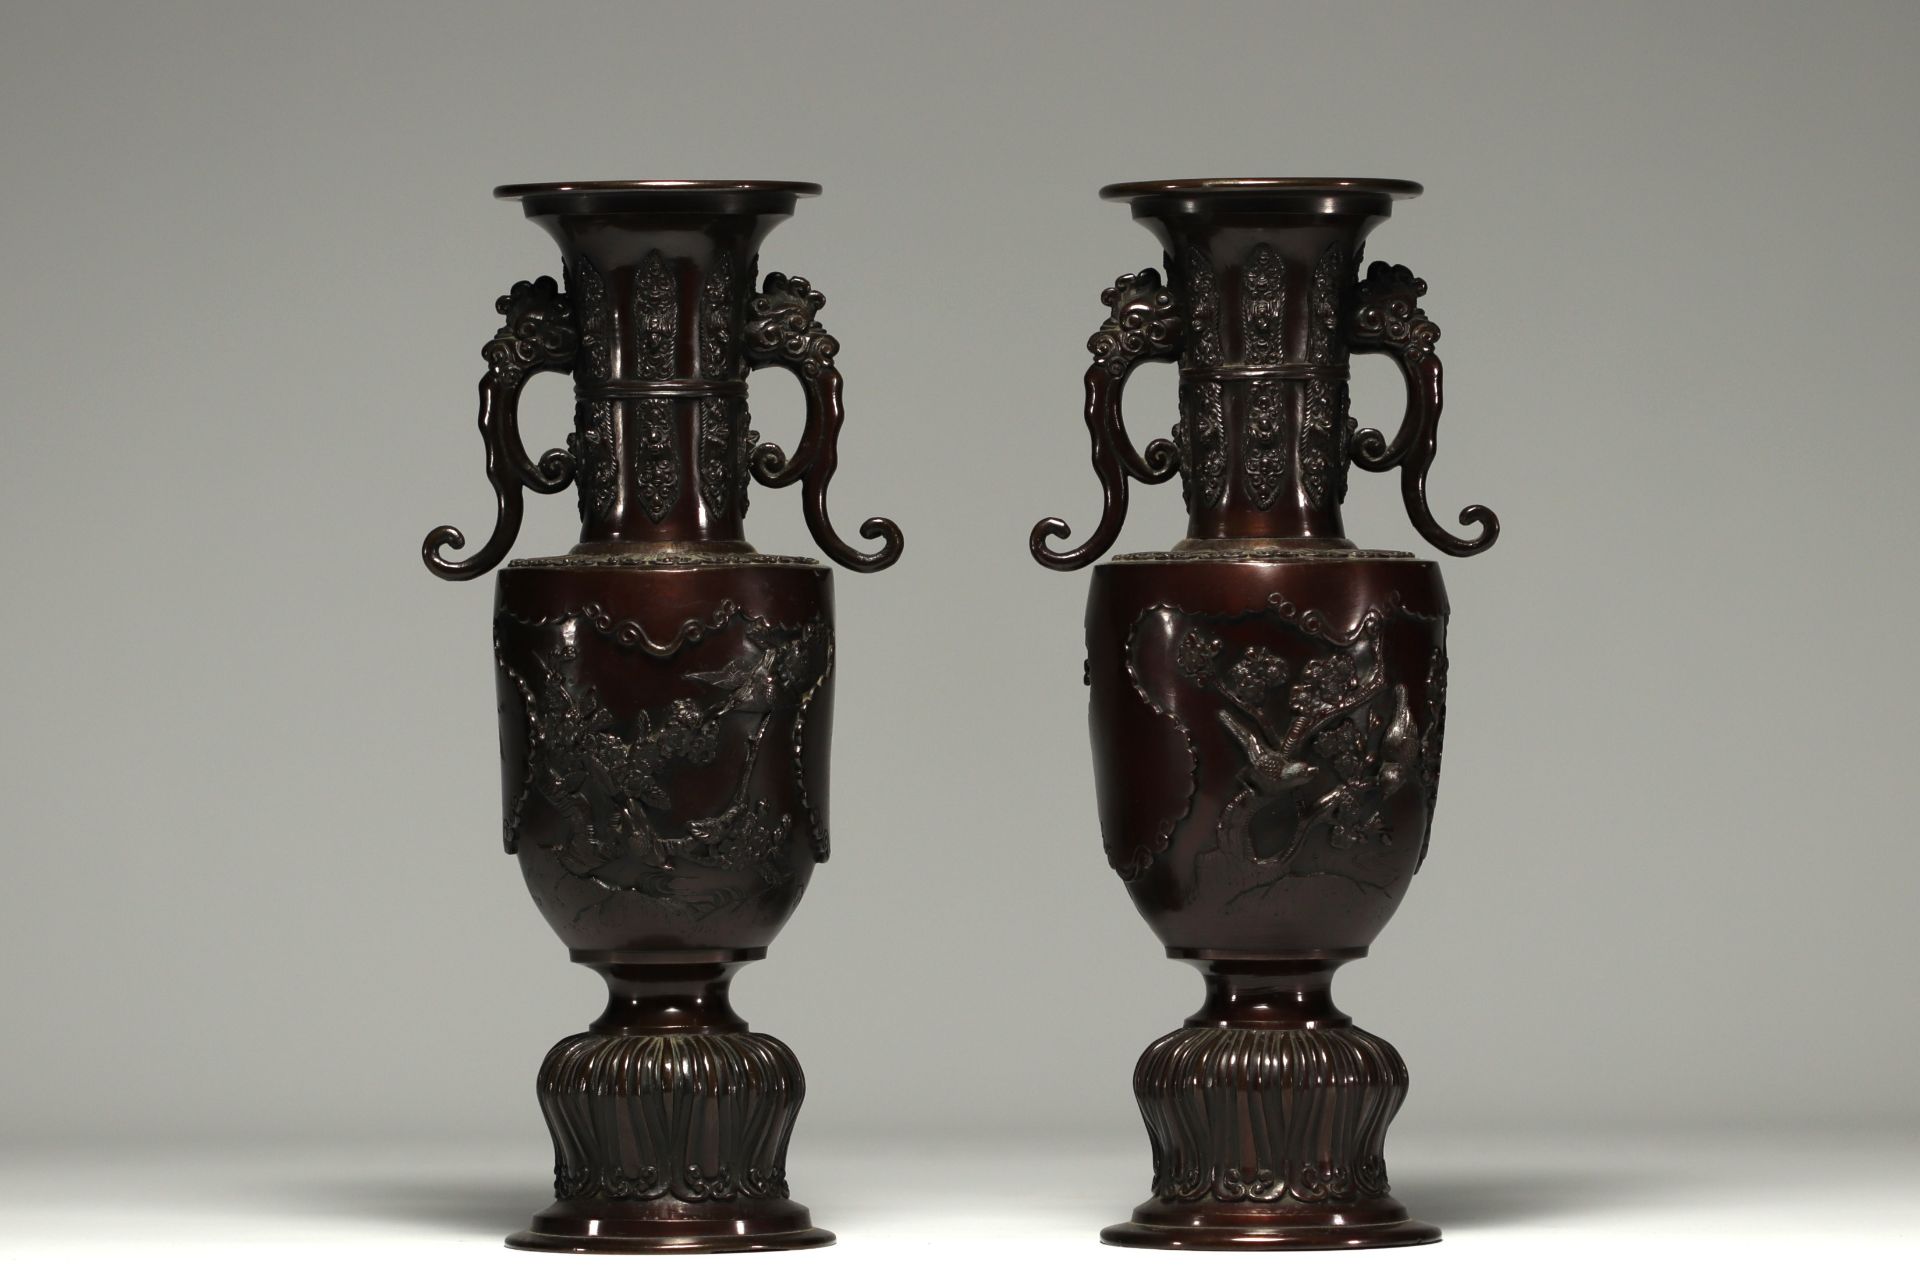 Japan - A pair of bronze vases with a brown patina, decorated with birds. - Image 3 of 3